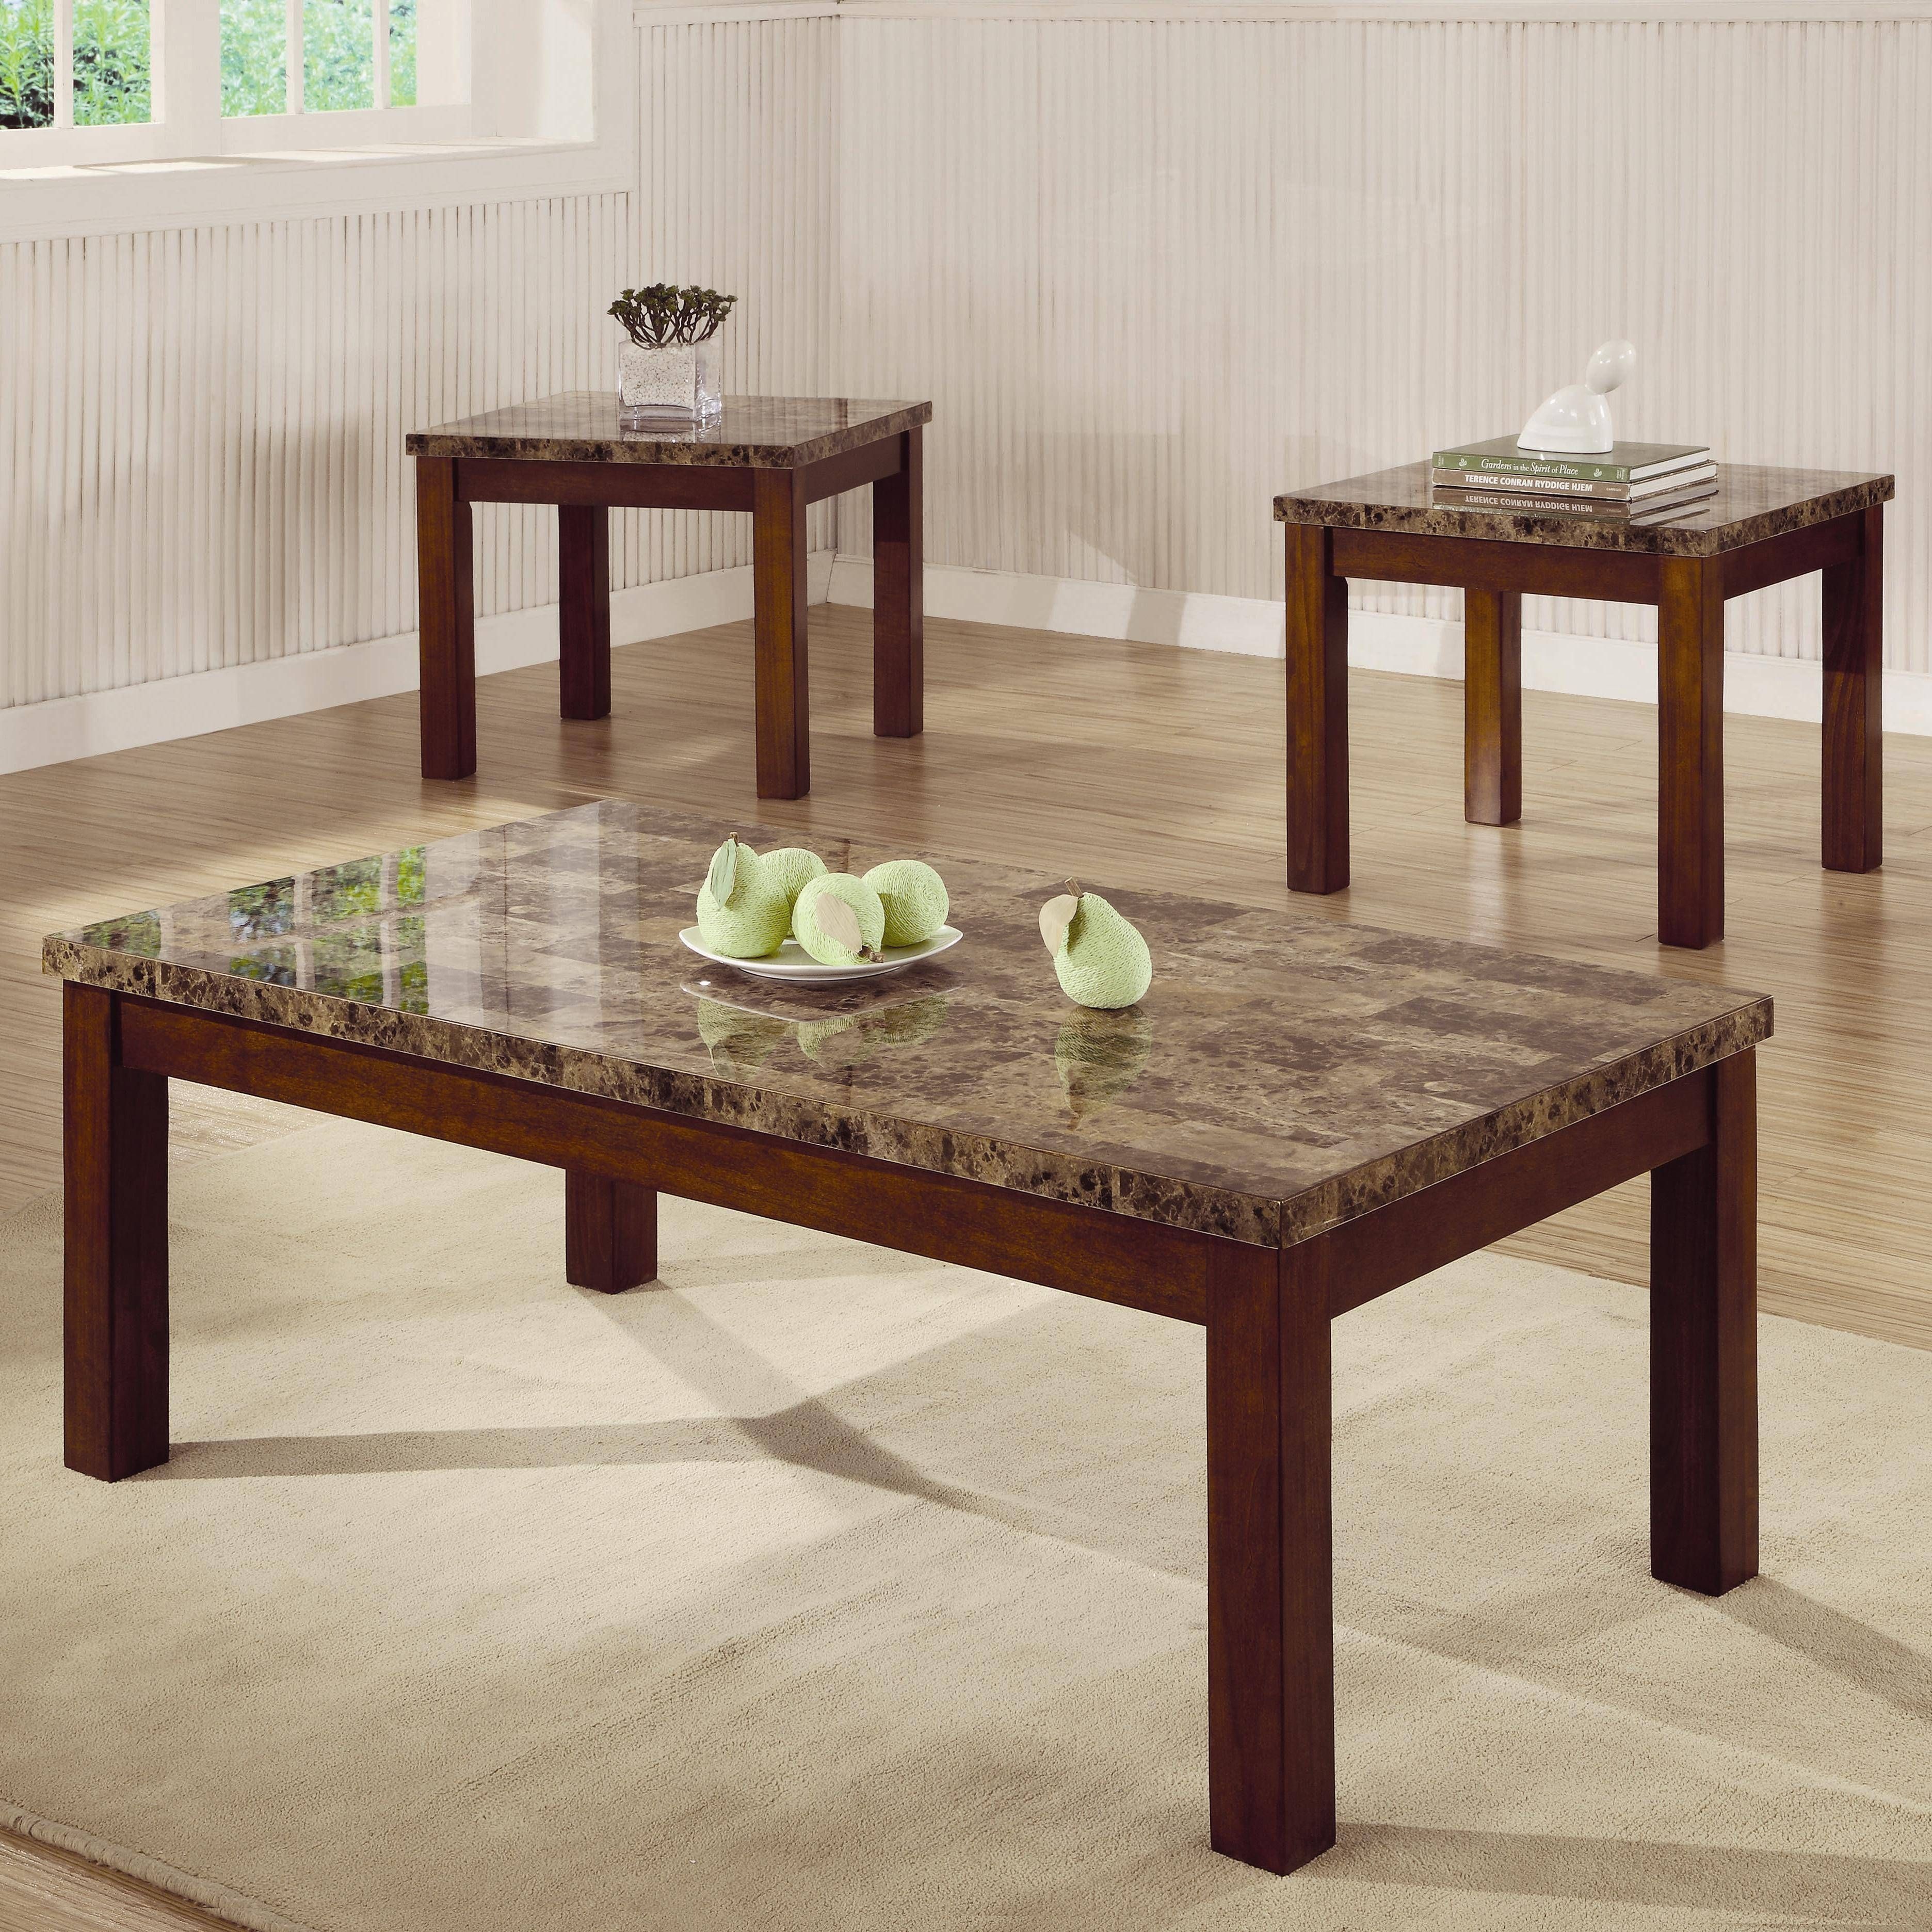 Coaster Occasional Table Sets Modern Coffee Table And End Table Intended For 2 Piece Coffee Table Sets (View 7 of 30)